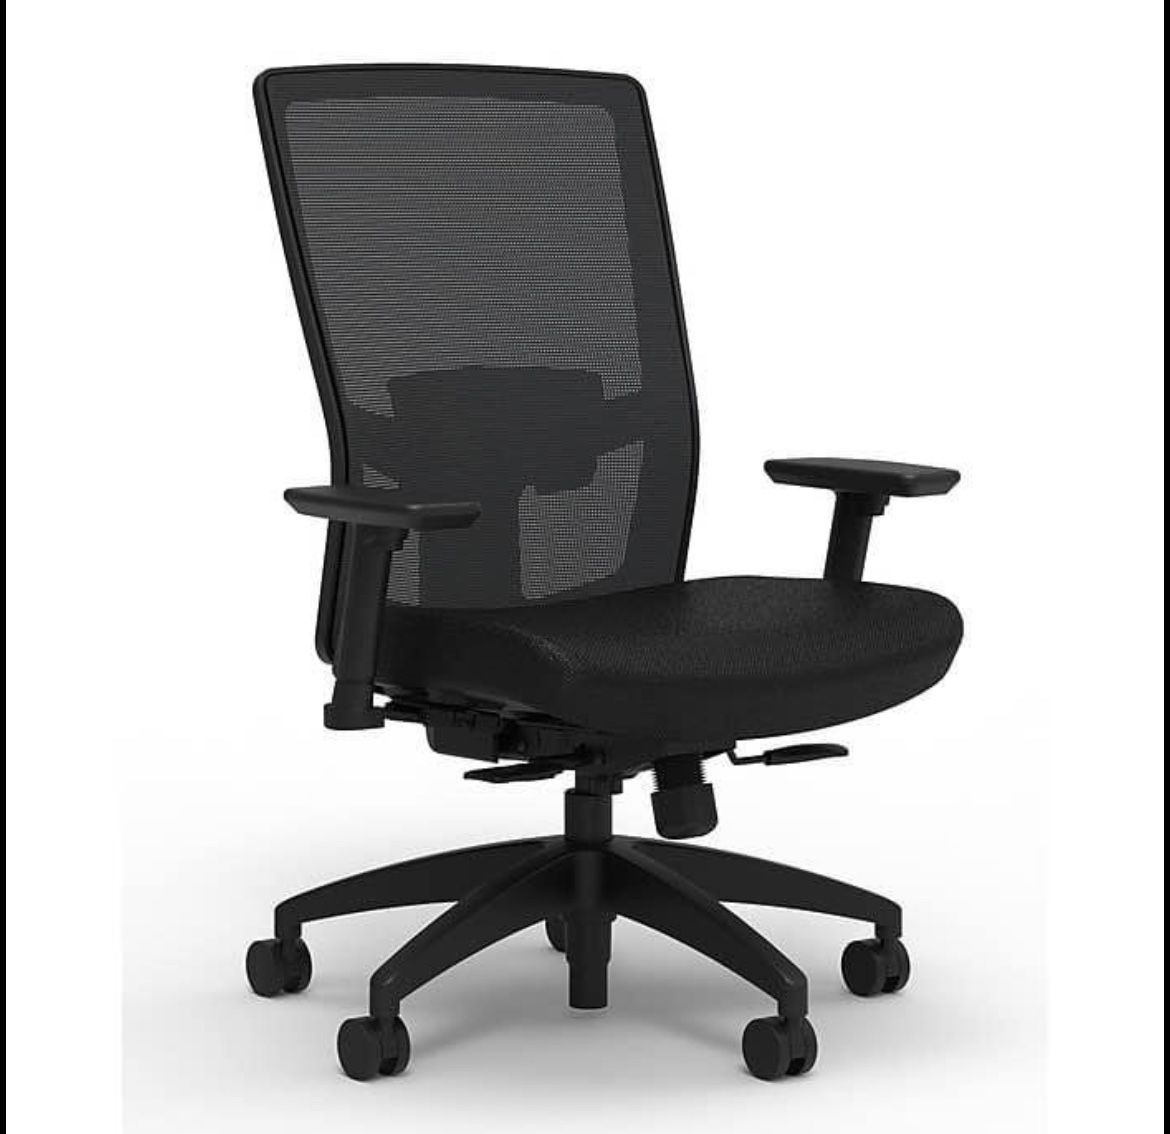 NEW Office chair Adjustable Lumbar, Arms & Seat. 